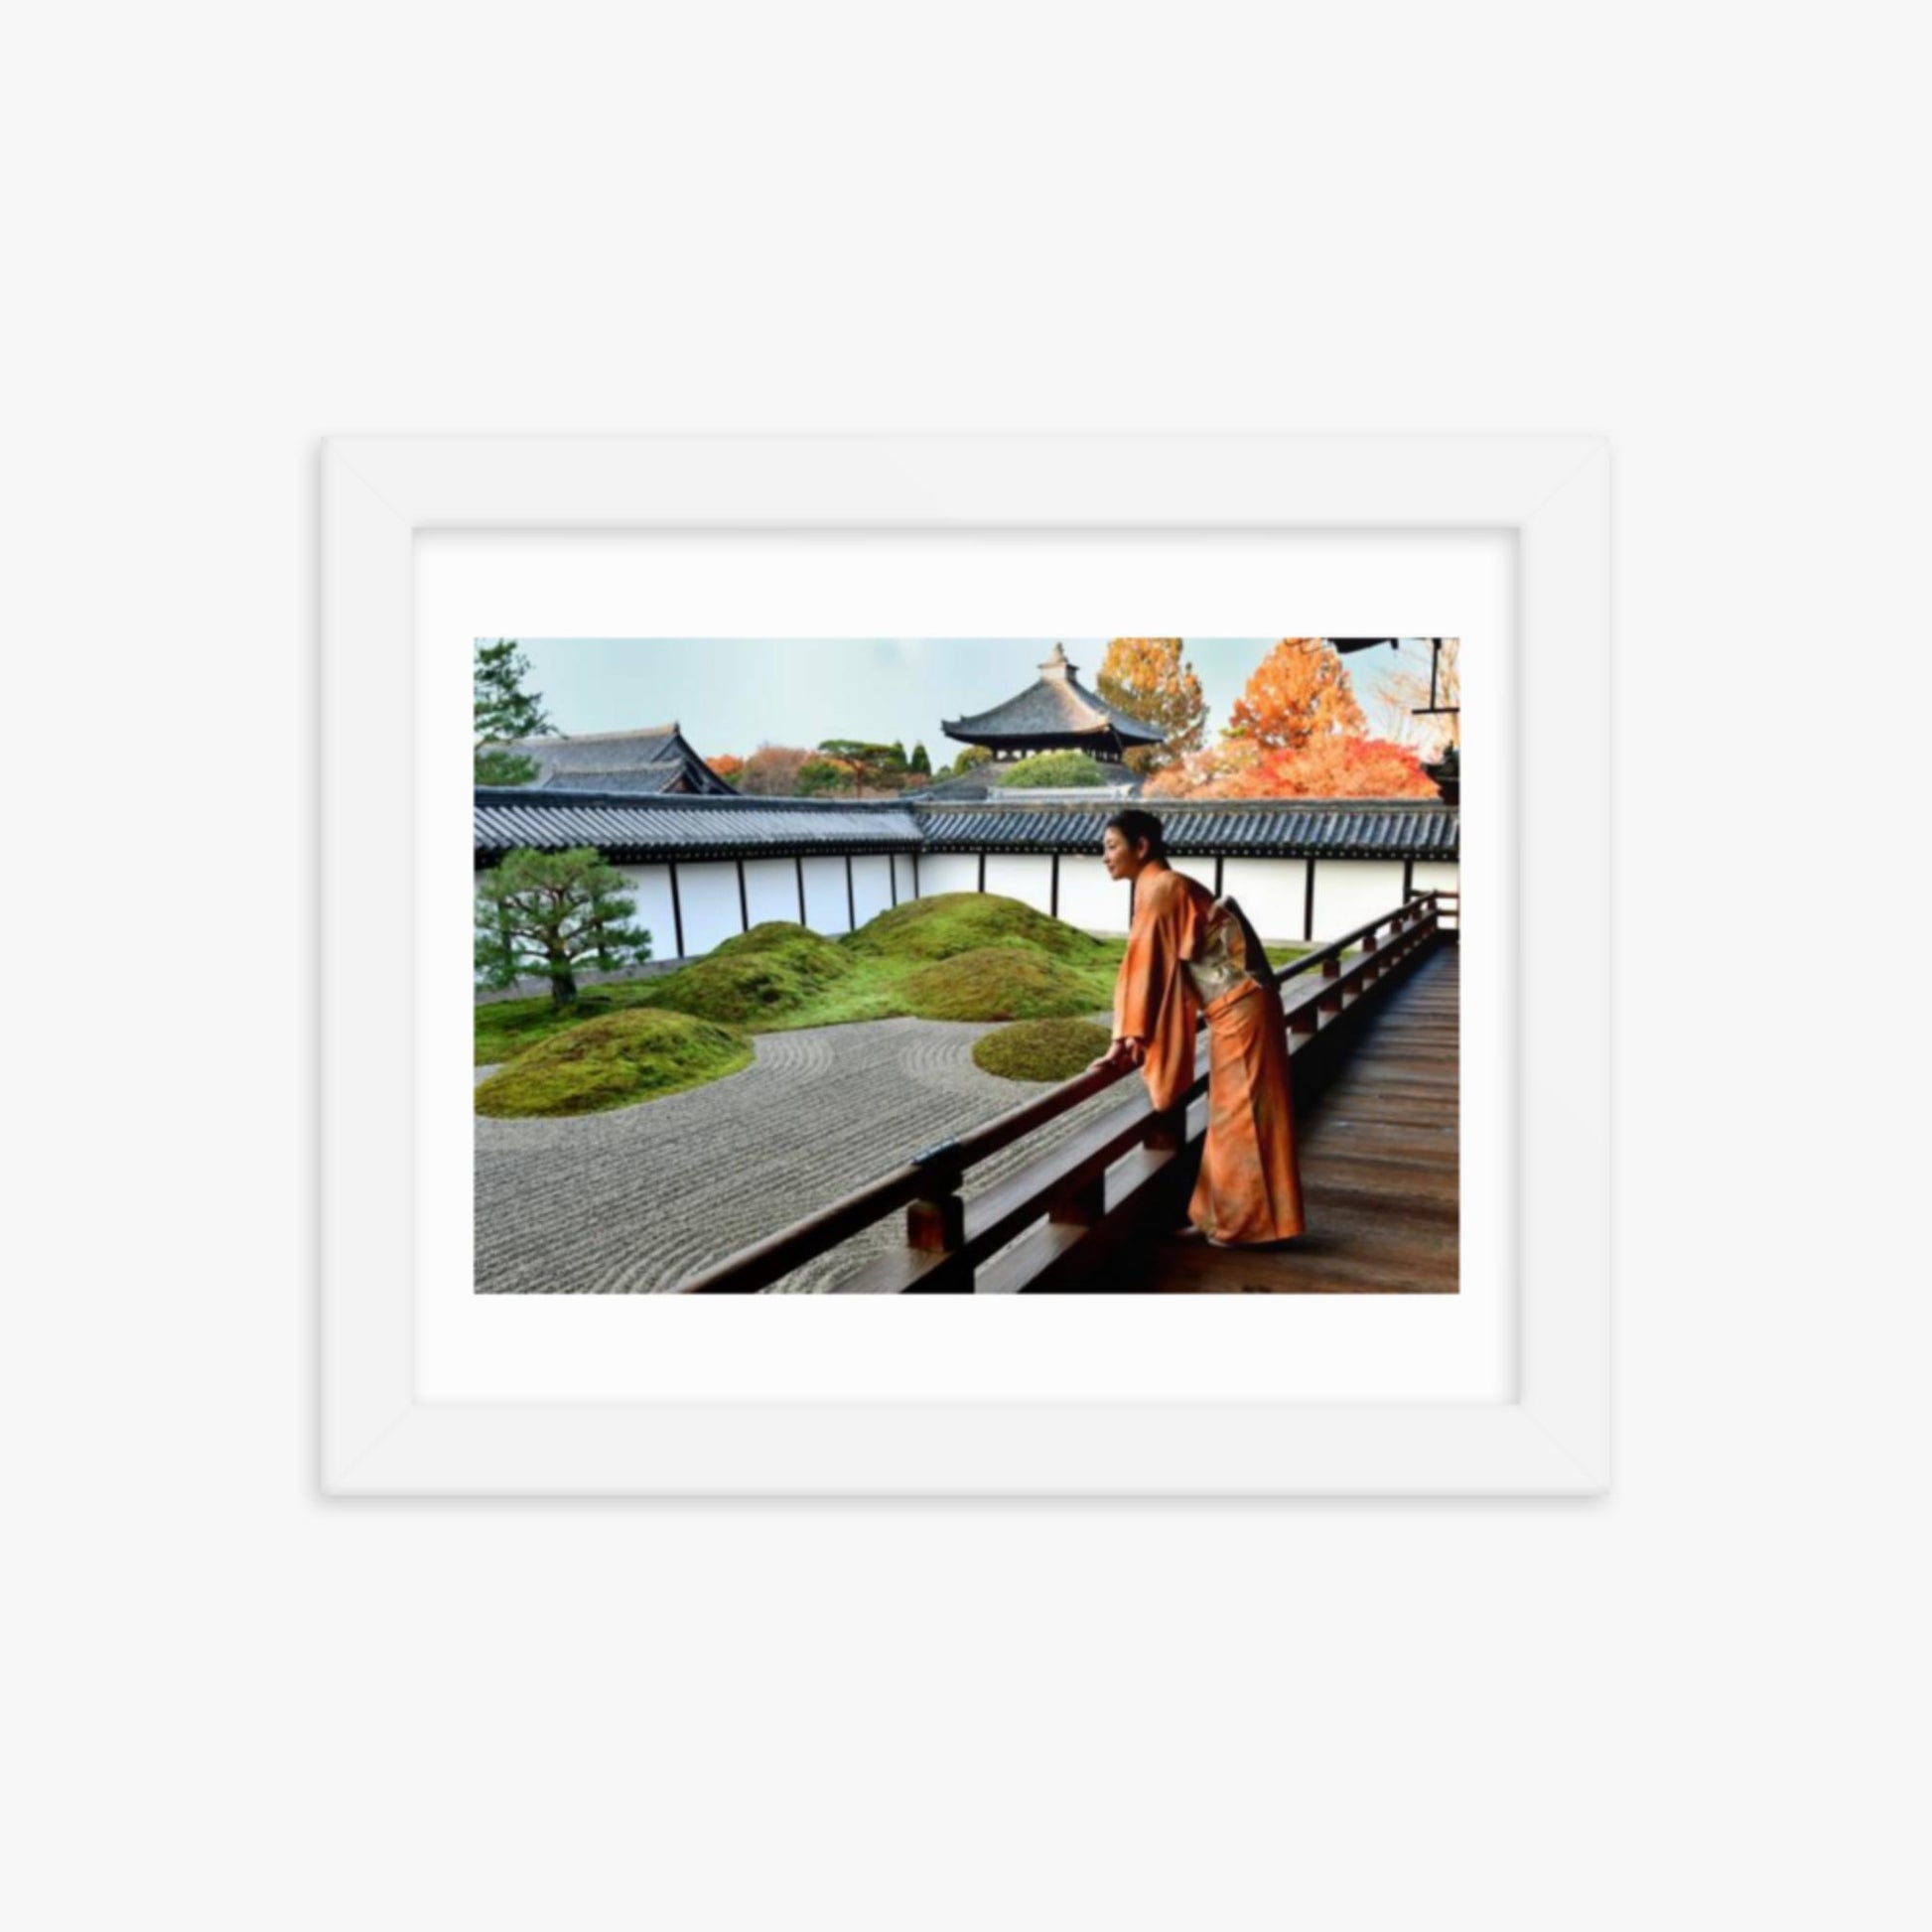 Japanese Woman in Kimono Appreciating Japanese Garden at Tofukuji, Kyoto 8x10 in Poster With White Frame